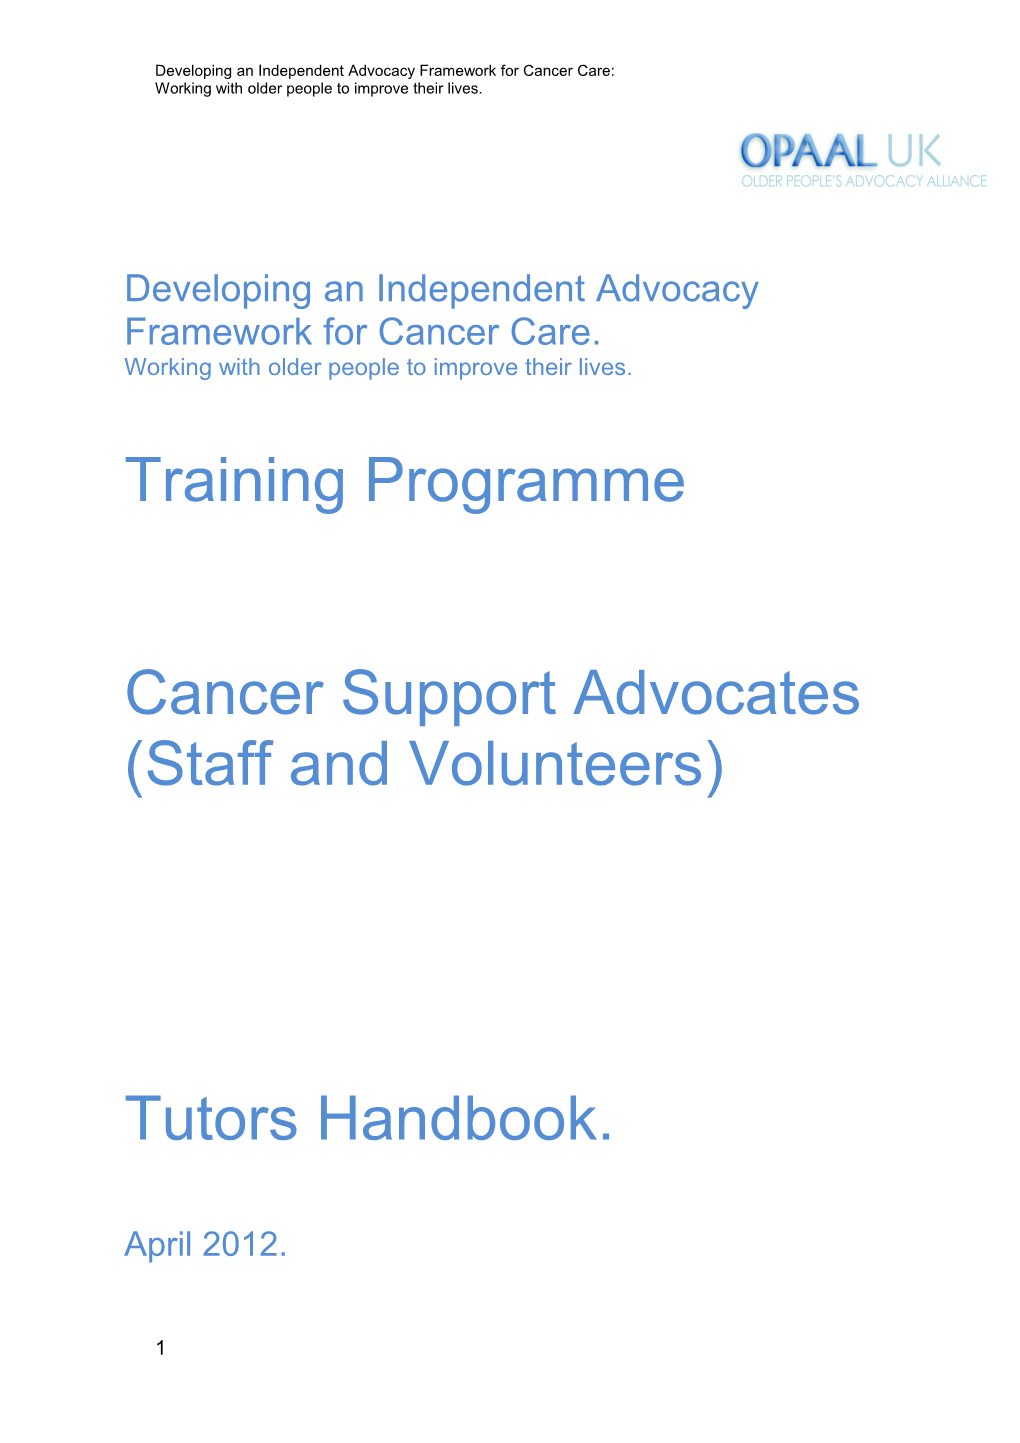 Developing an Independent Advocacy Framework for Cancer Care